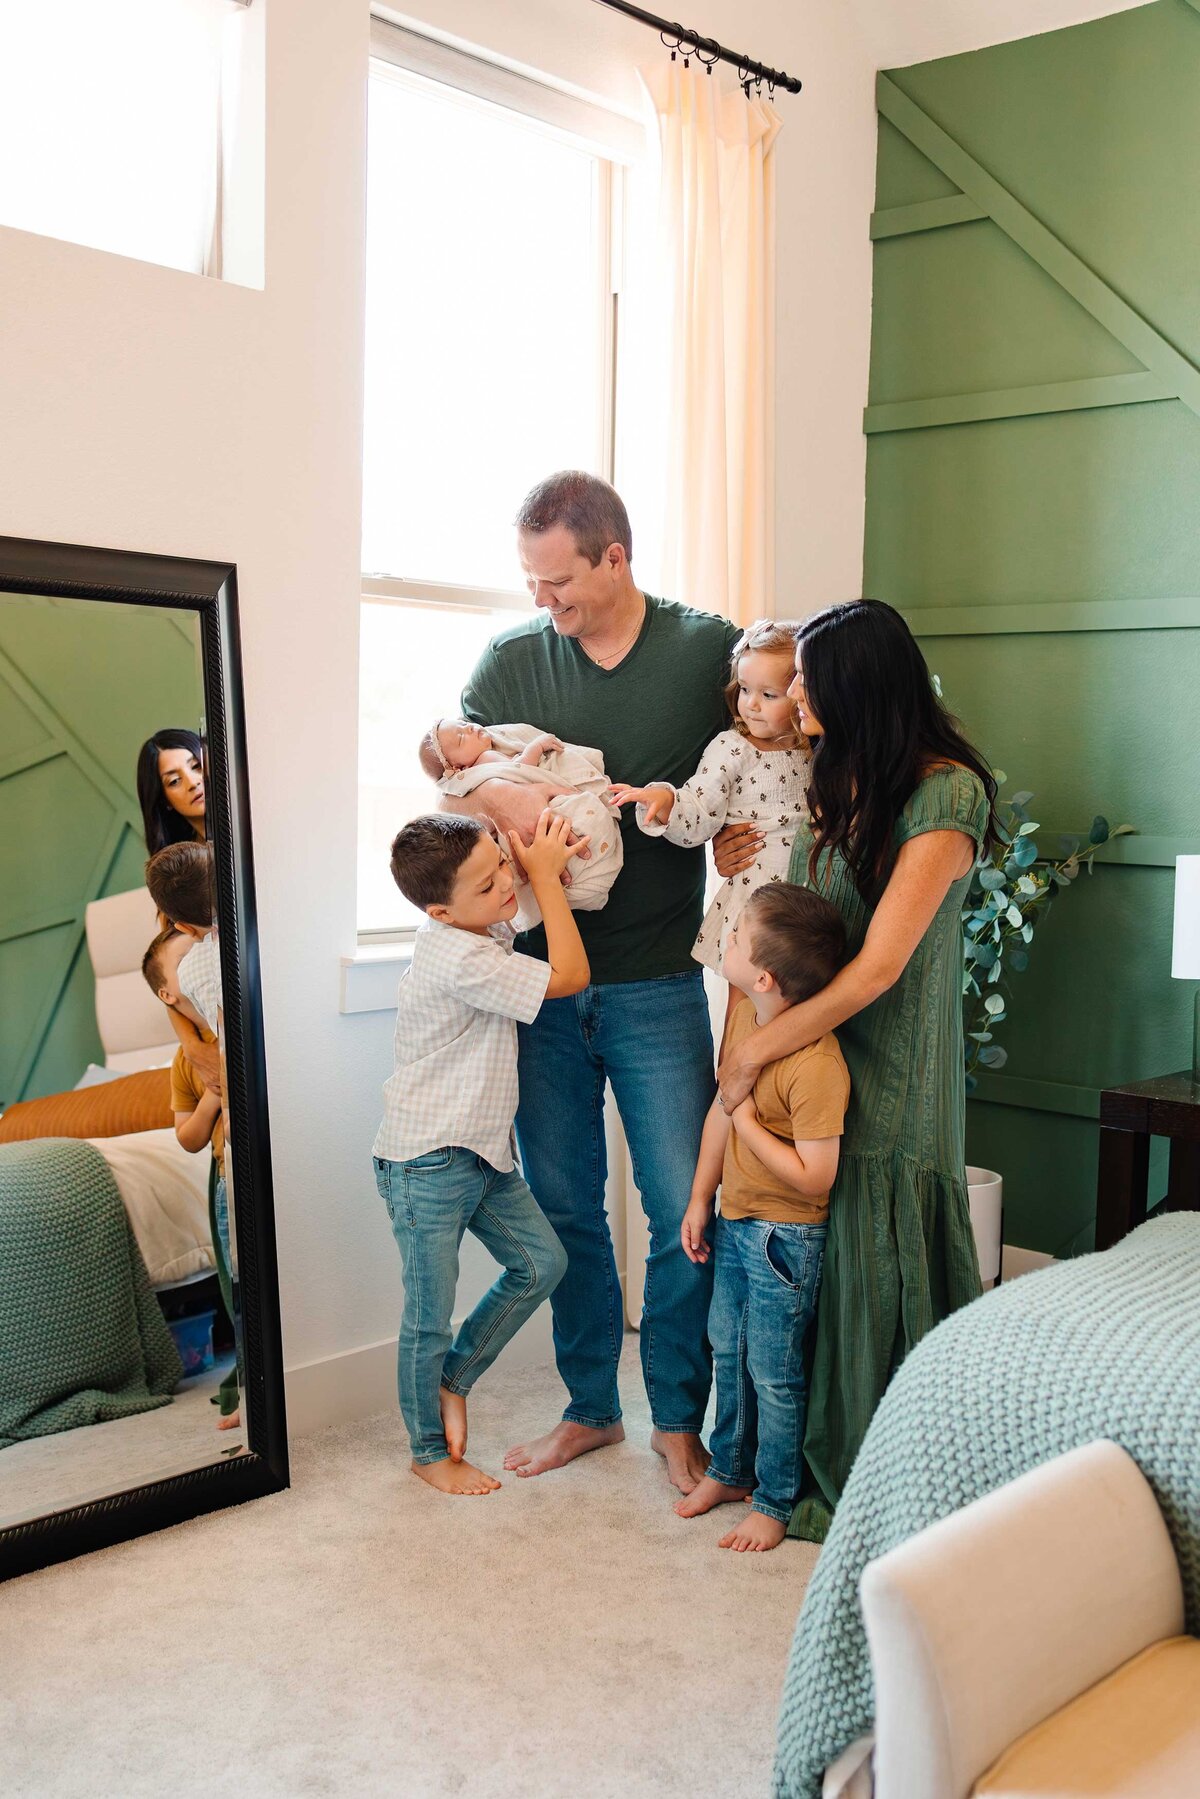 An amazing family enjoys a photography session with the best newborn photographer in Albuquerque. In a bedroom with green and cream decor, they wear elegant green outfits and jeans, expressing boho vibes.